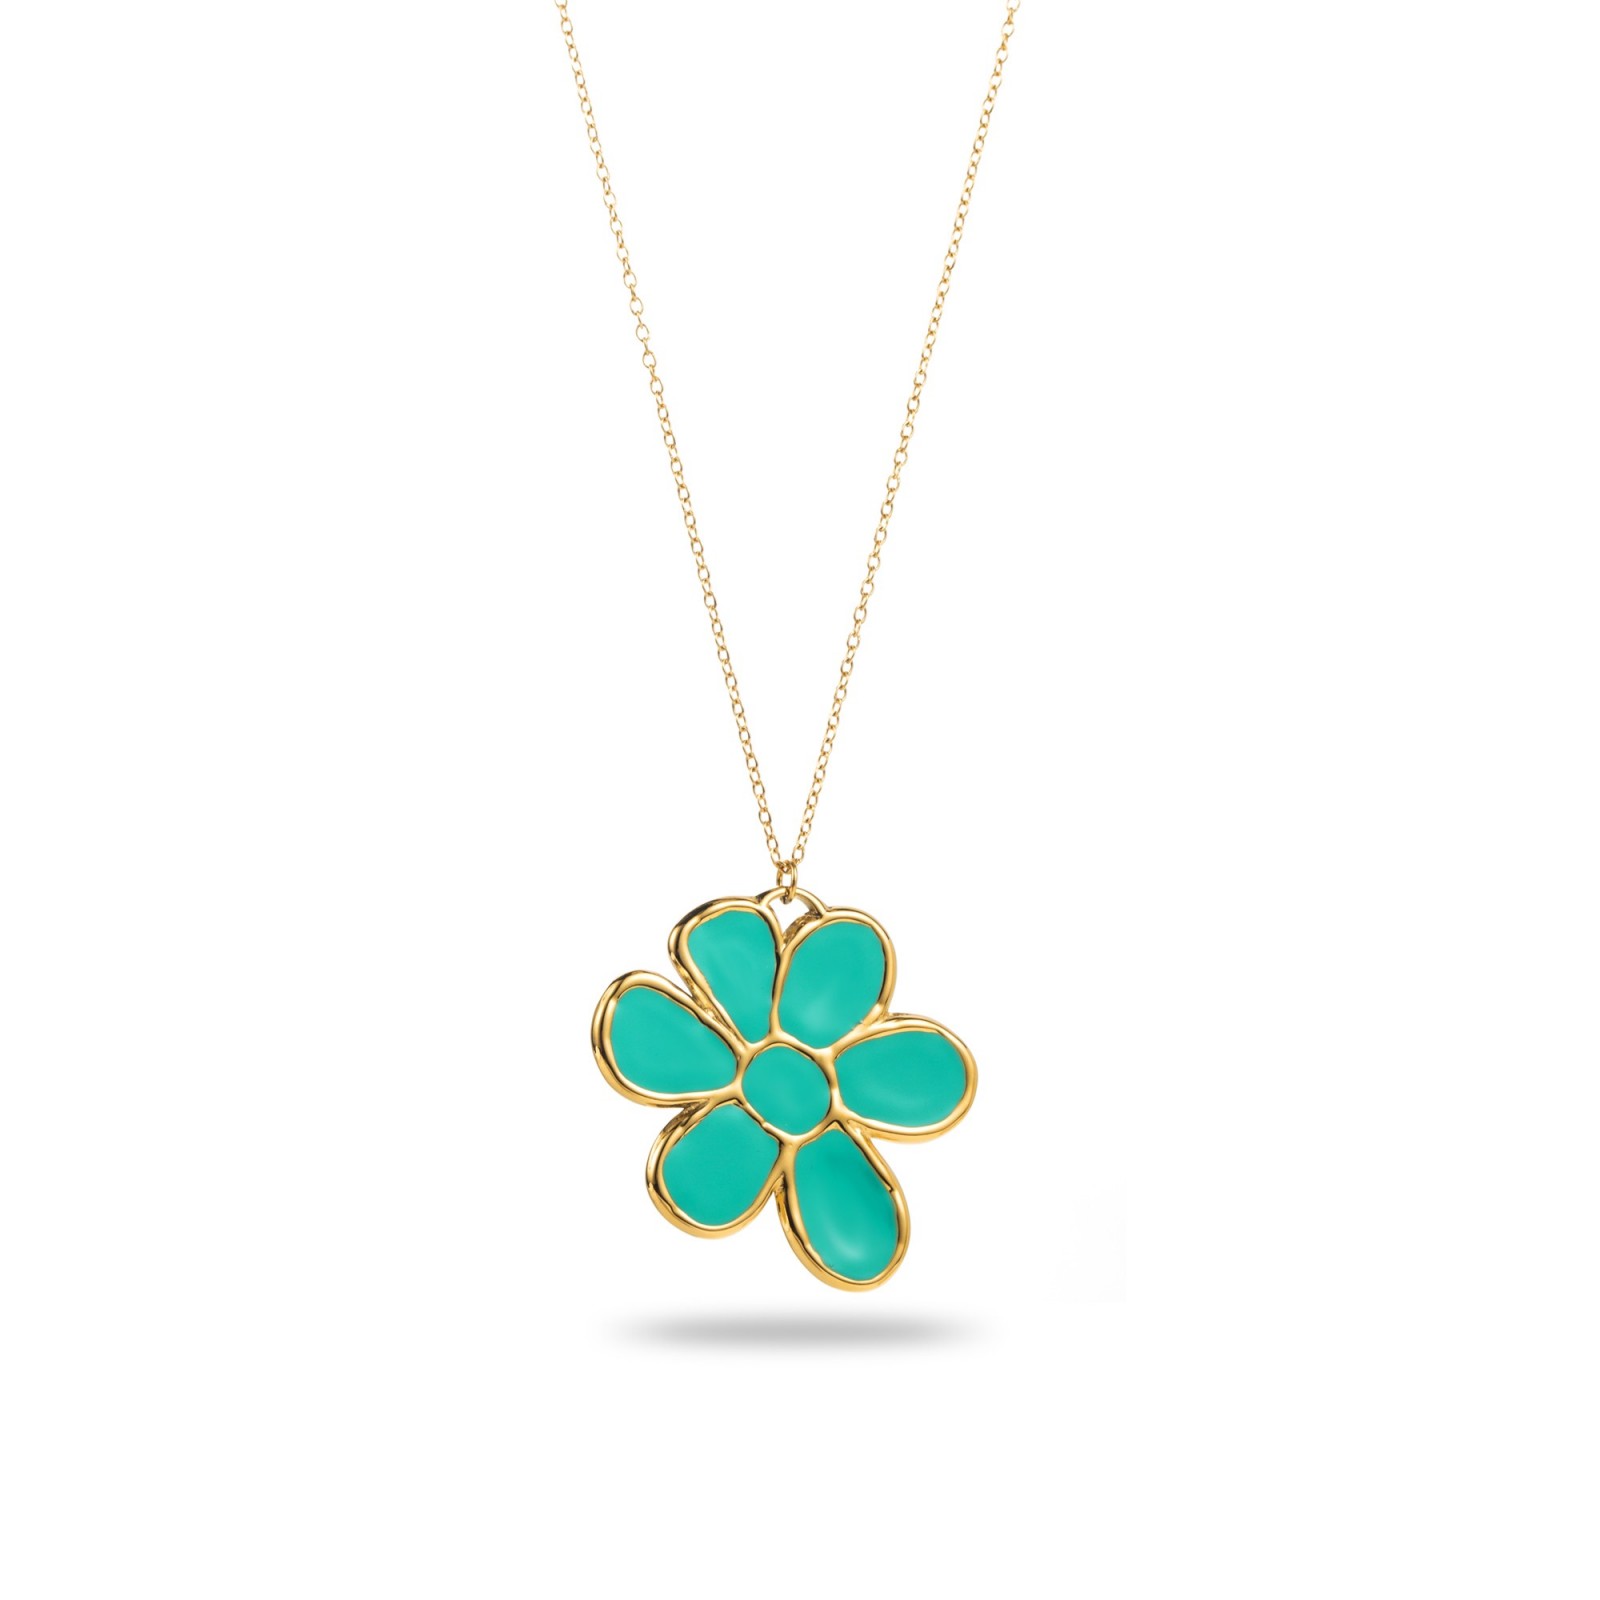 Collier Color:Turquoise Blue